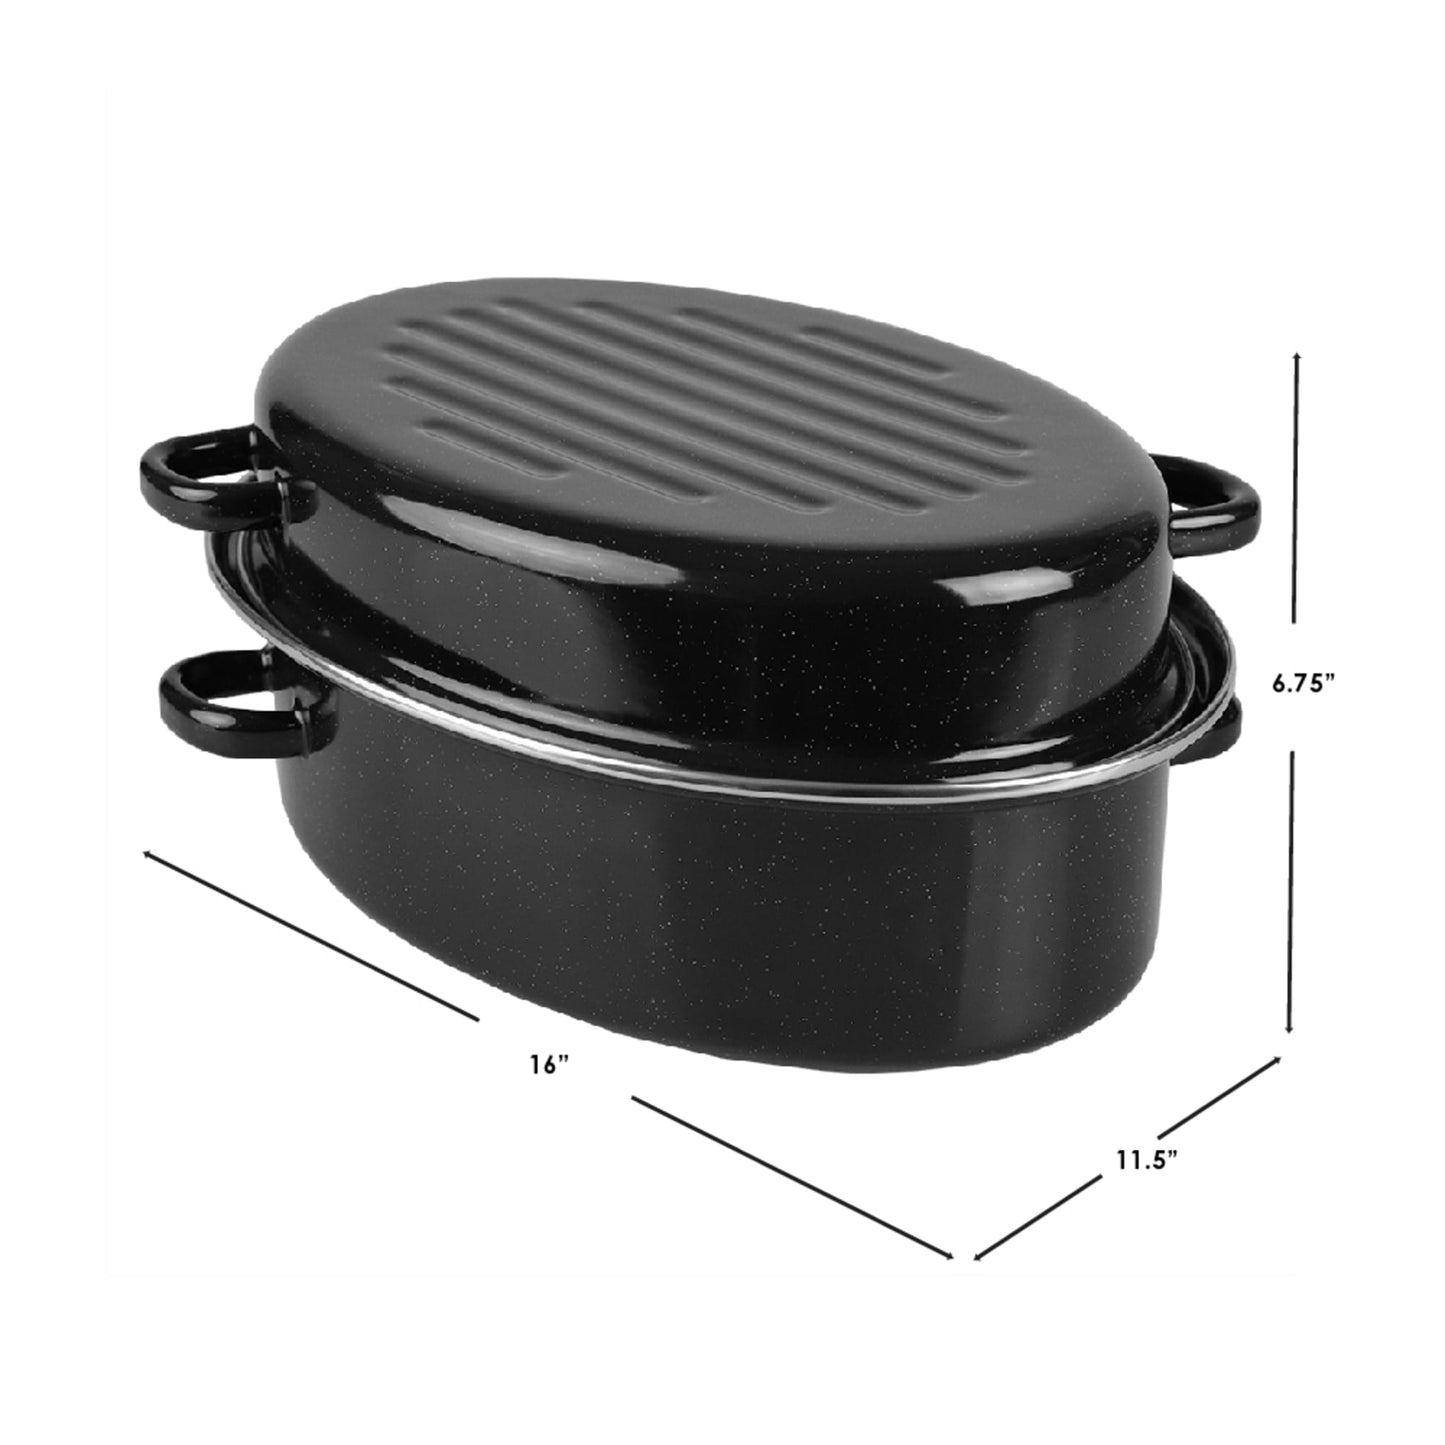 Deep Oval Natural Non-Stick 14” Enameled Carbon Steel Roaster Pan with Lid, Black